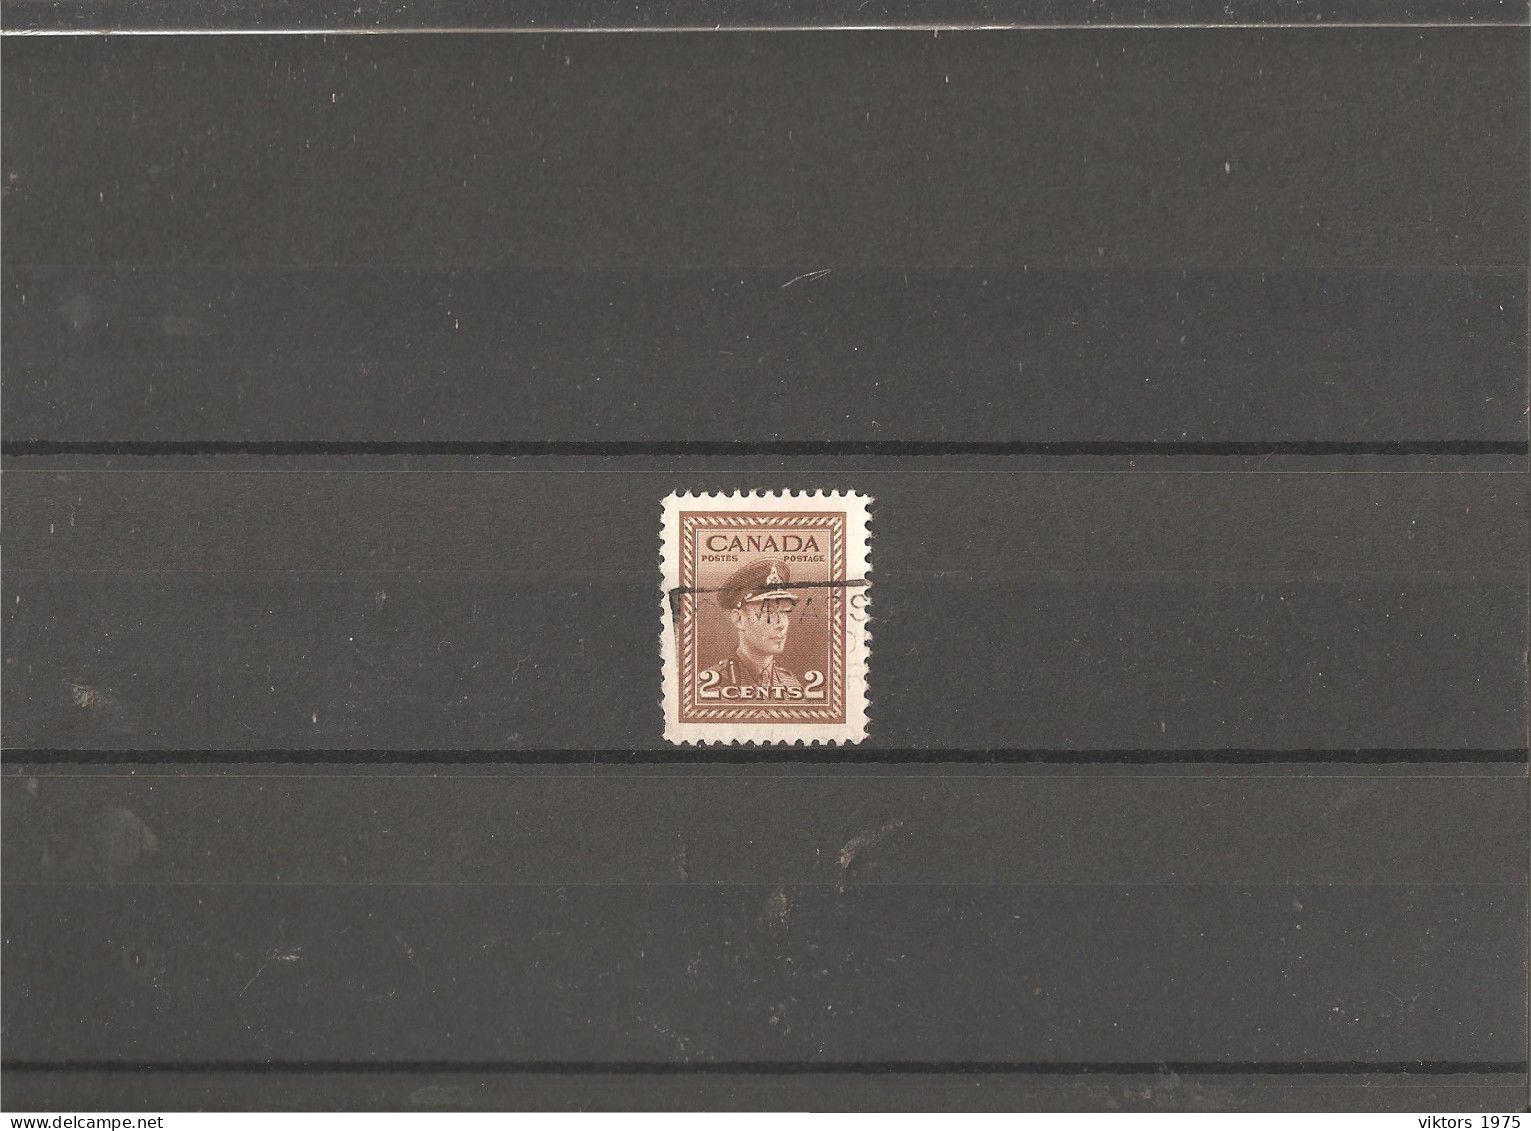 Used Stamp Nr.251 In Darnell Catalog  - Used Stamps